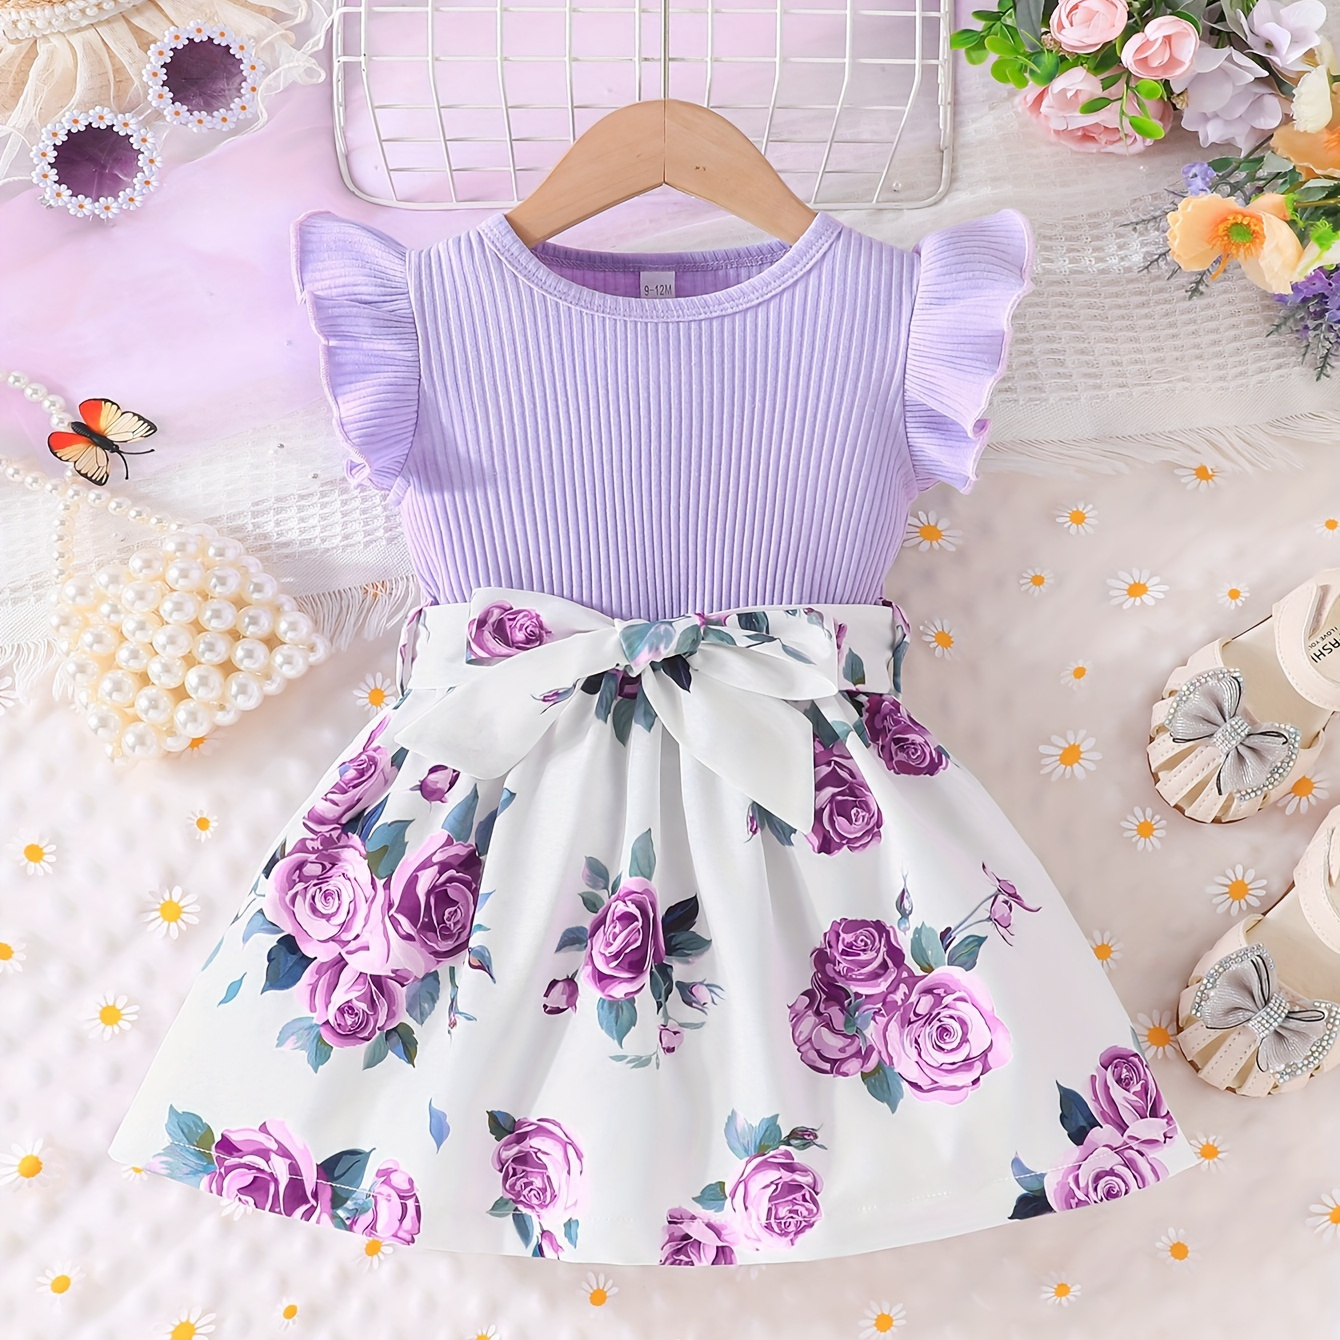 

Cute Infant Baby Girl Elegant Dress Spring Summer New Explosive Pit Strip Stitching Romantic Flower Print Round Neck Small Flying Sleeve Dress With Belt Combination Clothes